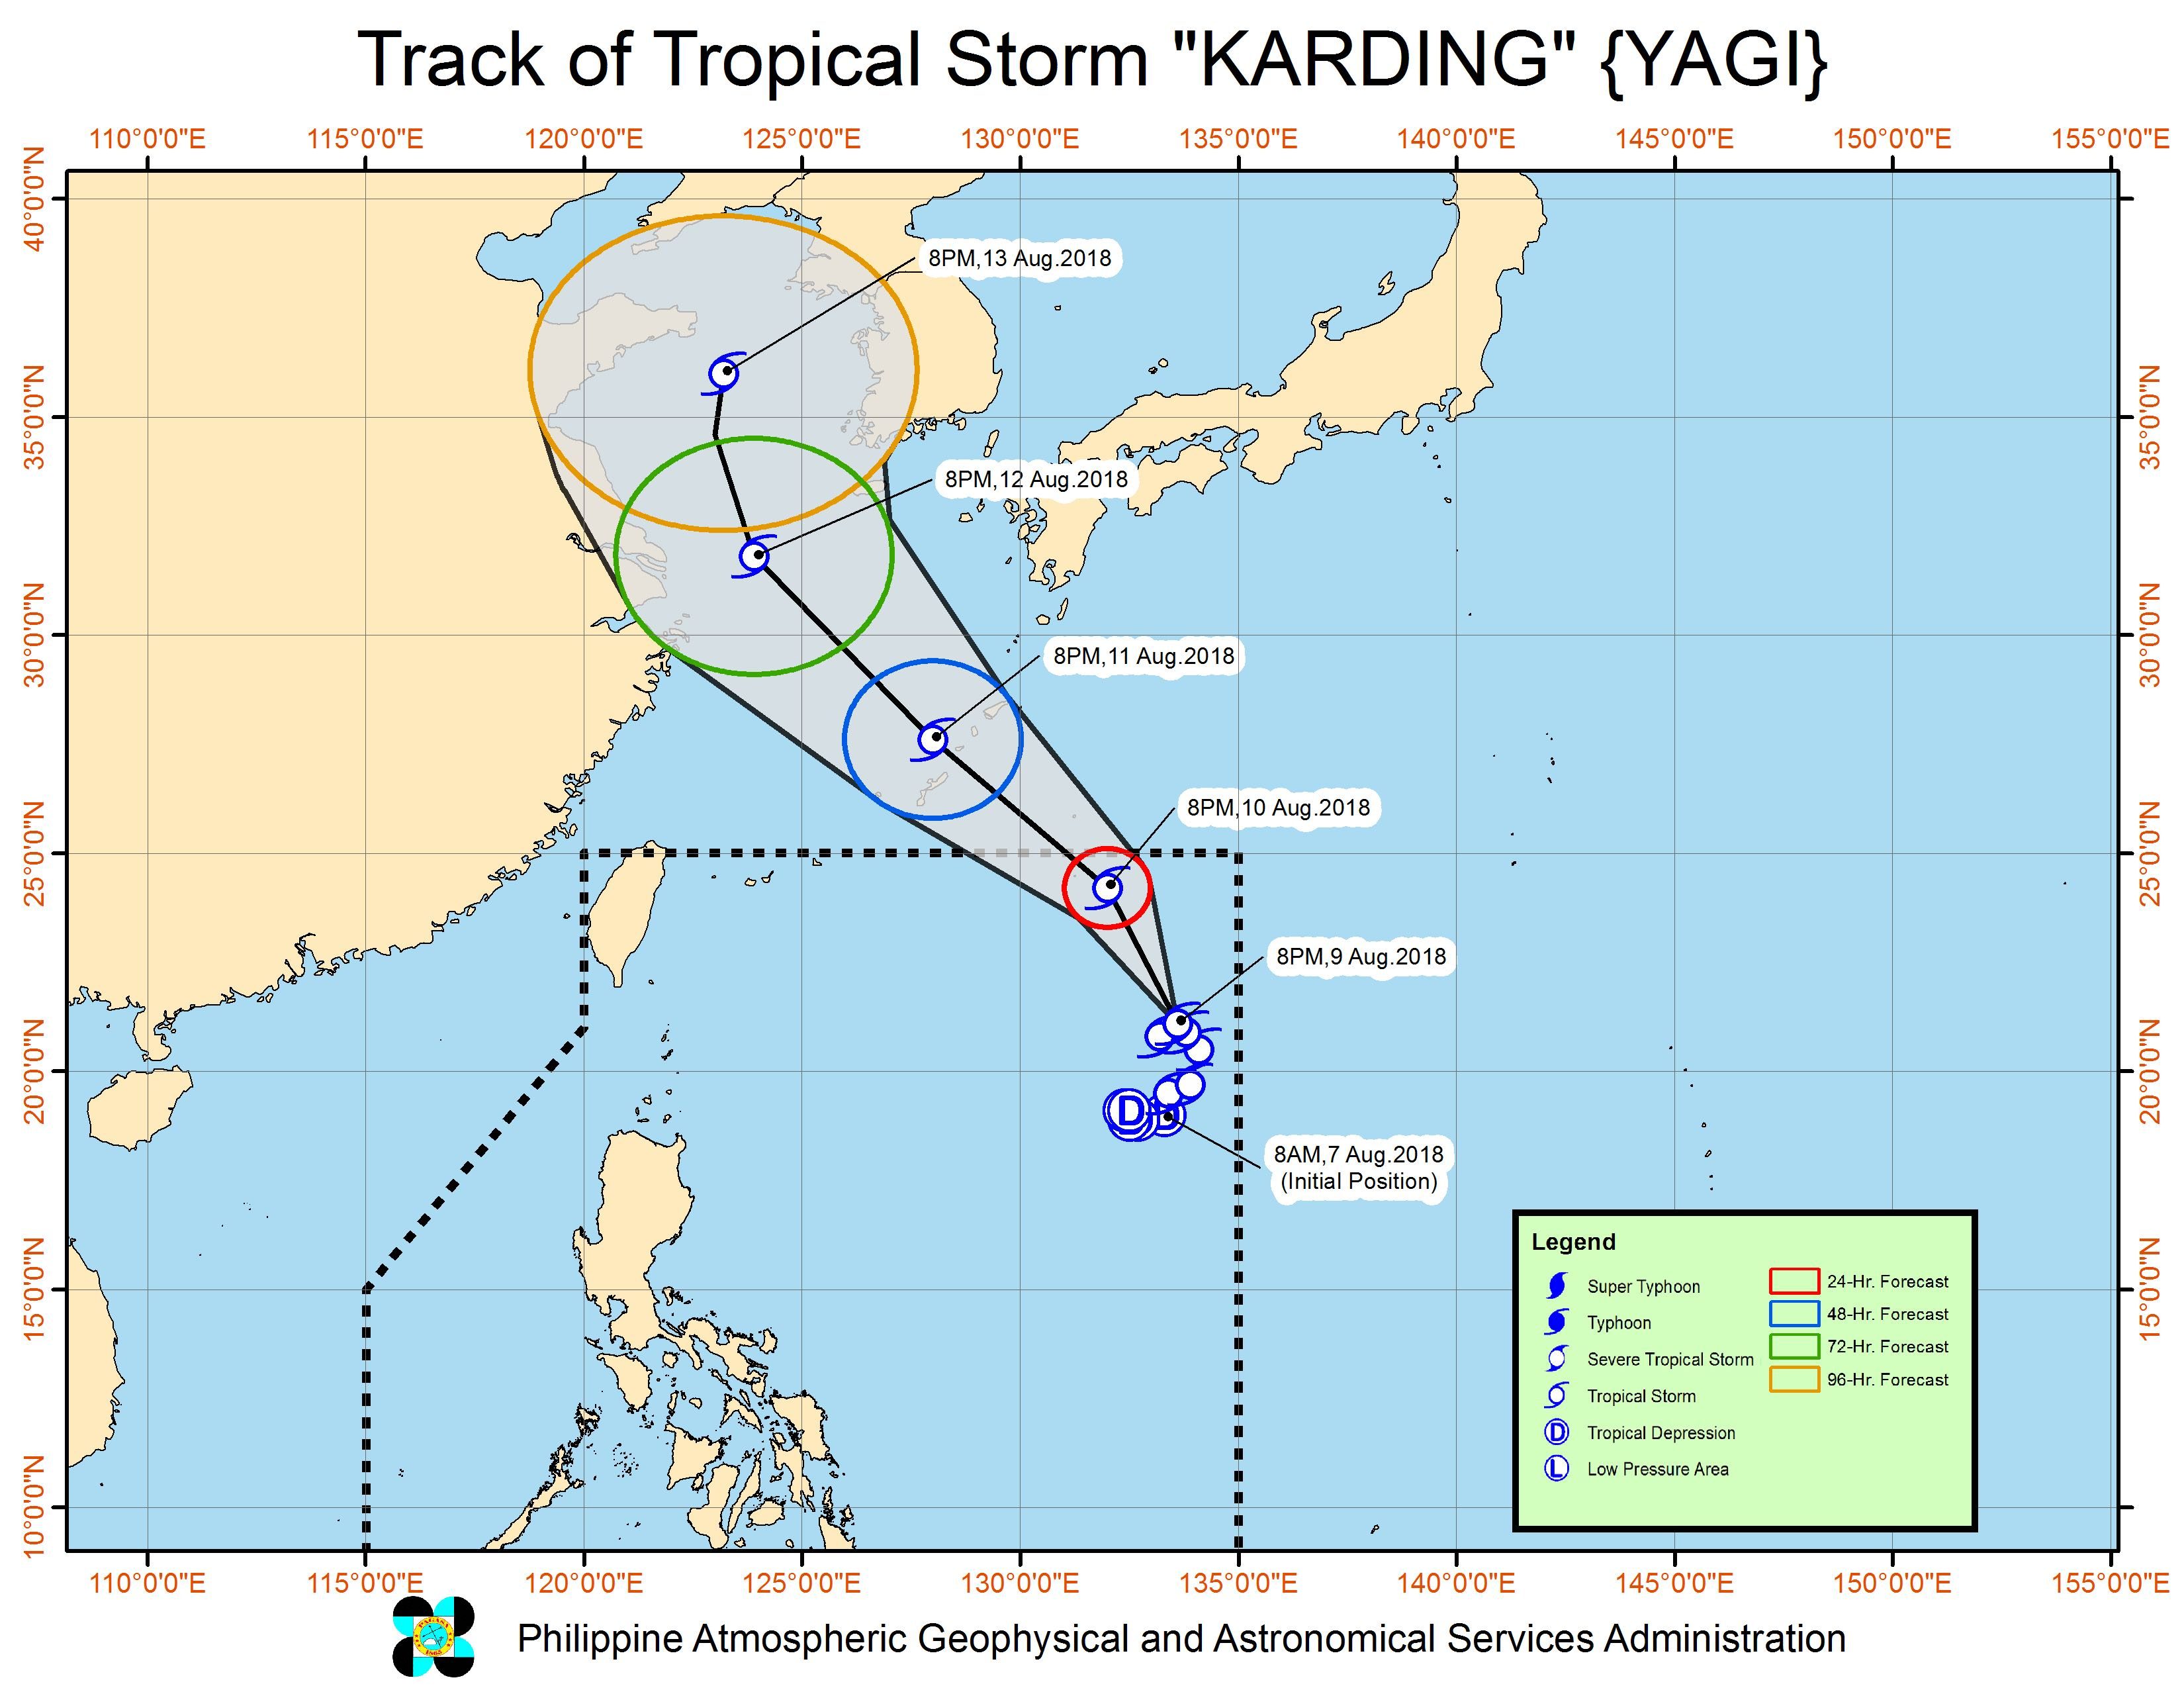 Forecast track of Tropical Storm Karding (Yagi) as of August 9, 2018, 11 pm. Image from PAGASA 